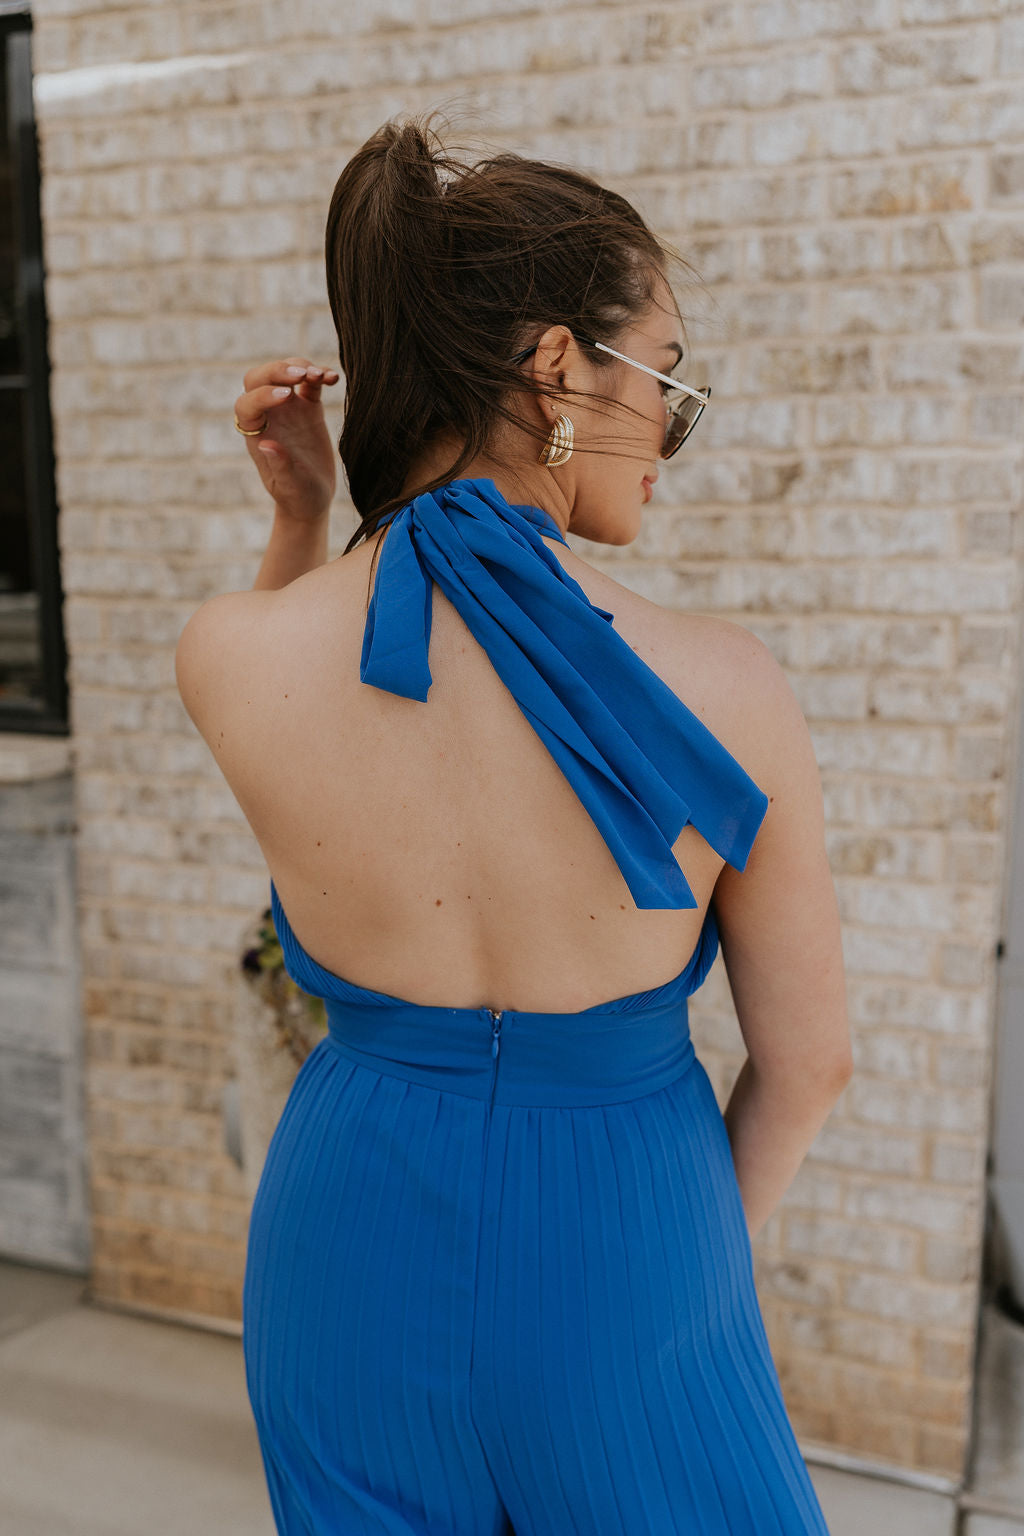 Back view of female model wearing the Juliette Blue Halter Tie Pleated Jumpsuit which features Blue Lightweight Fabric, Pleated Wide Pant Legs, Front Key Hole Design, Halter Neckline Tie Closure and Open Back